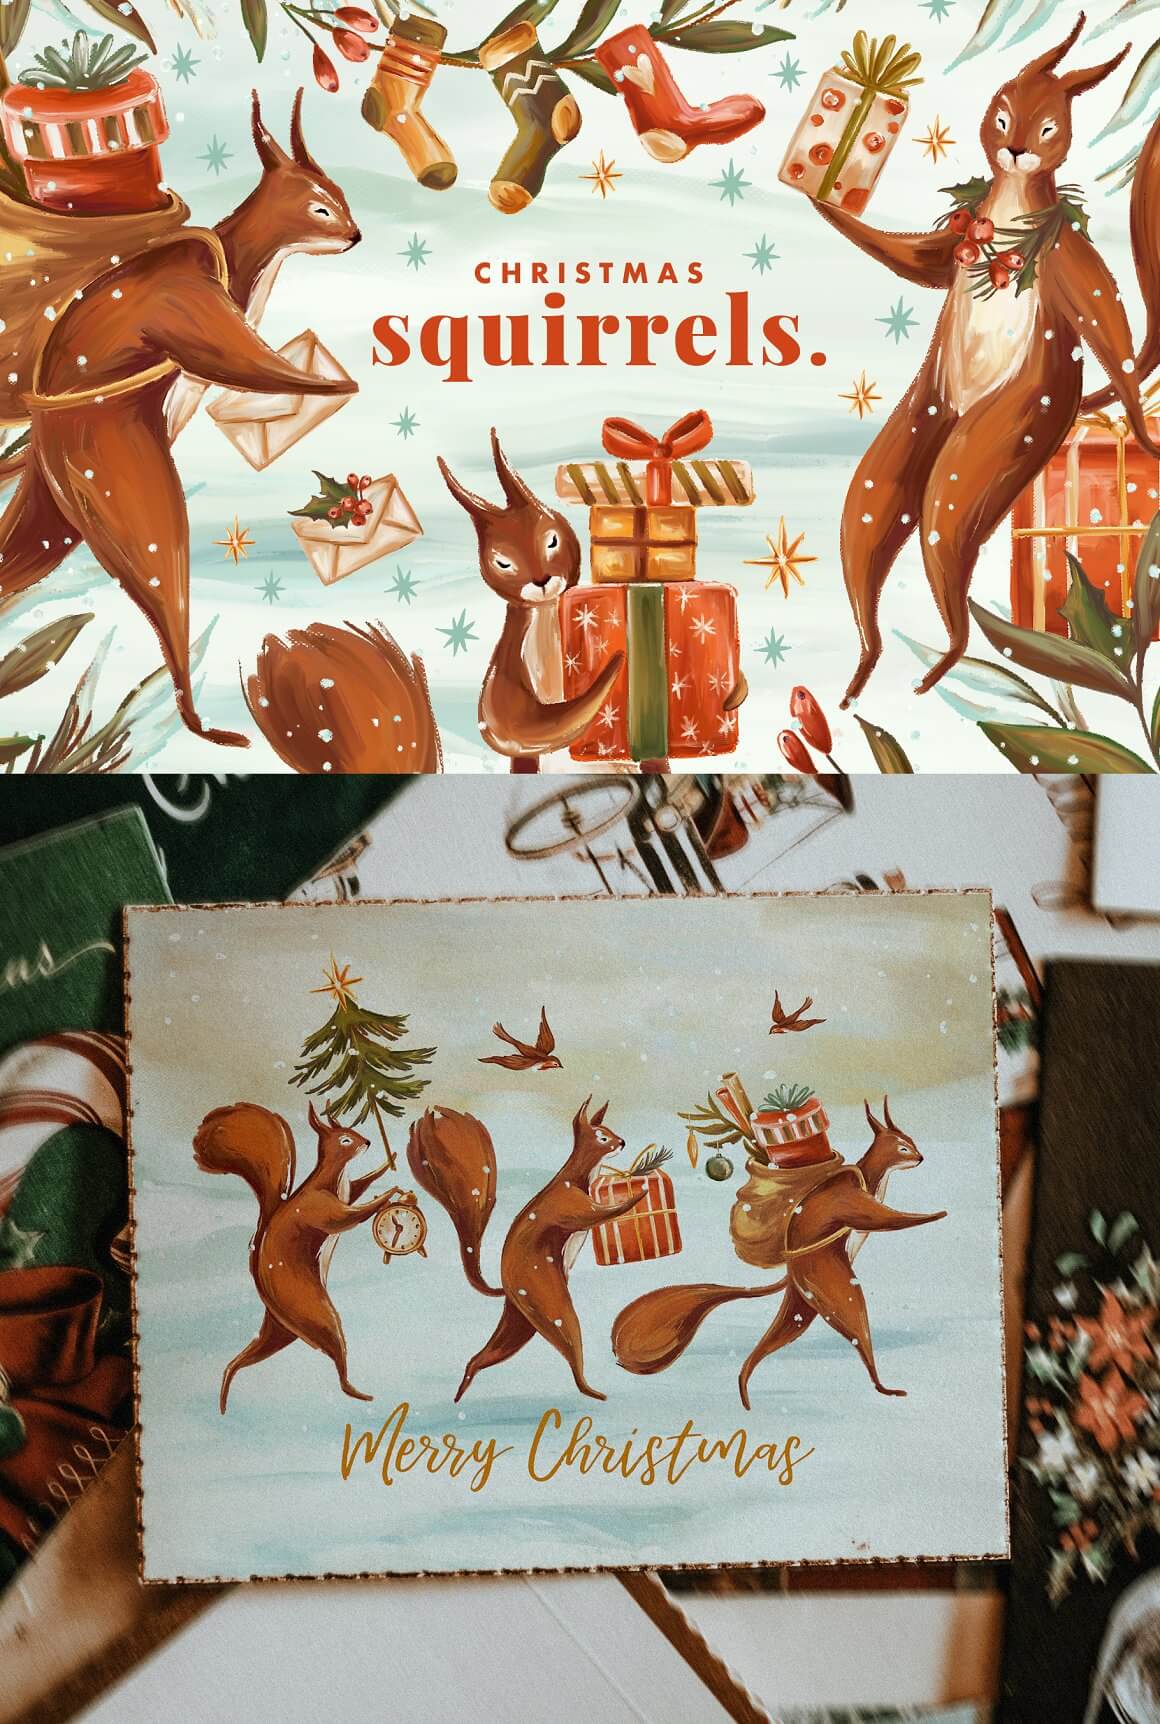 Christmas squirrels with Christmas tree, gifts and clock.